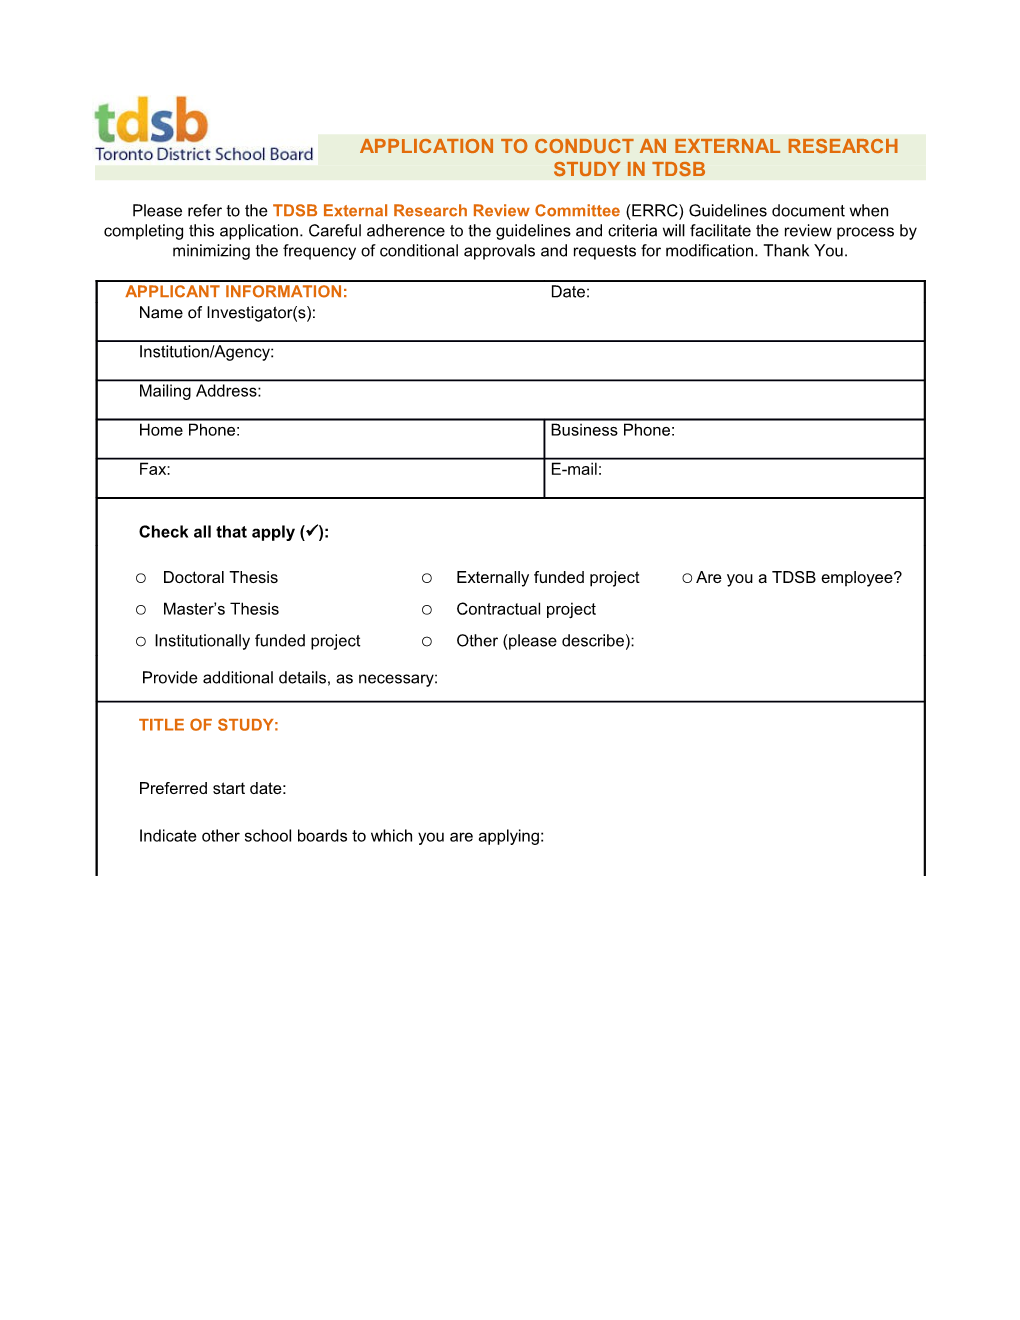 Application to Conduct an External Research Study in Tdsb